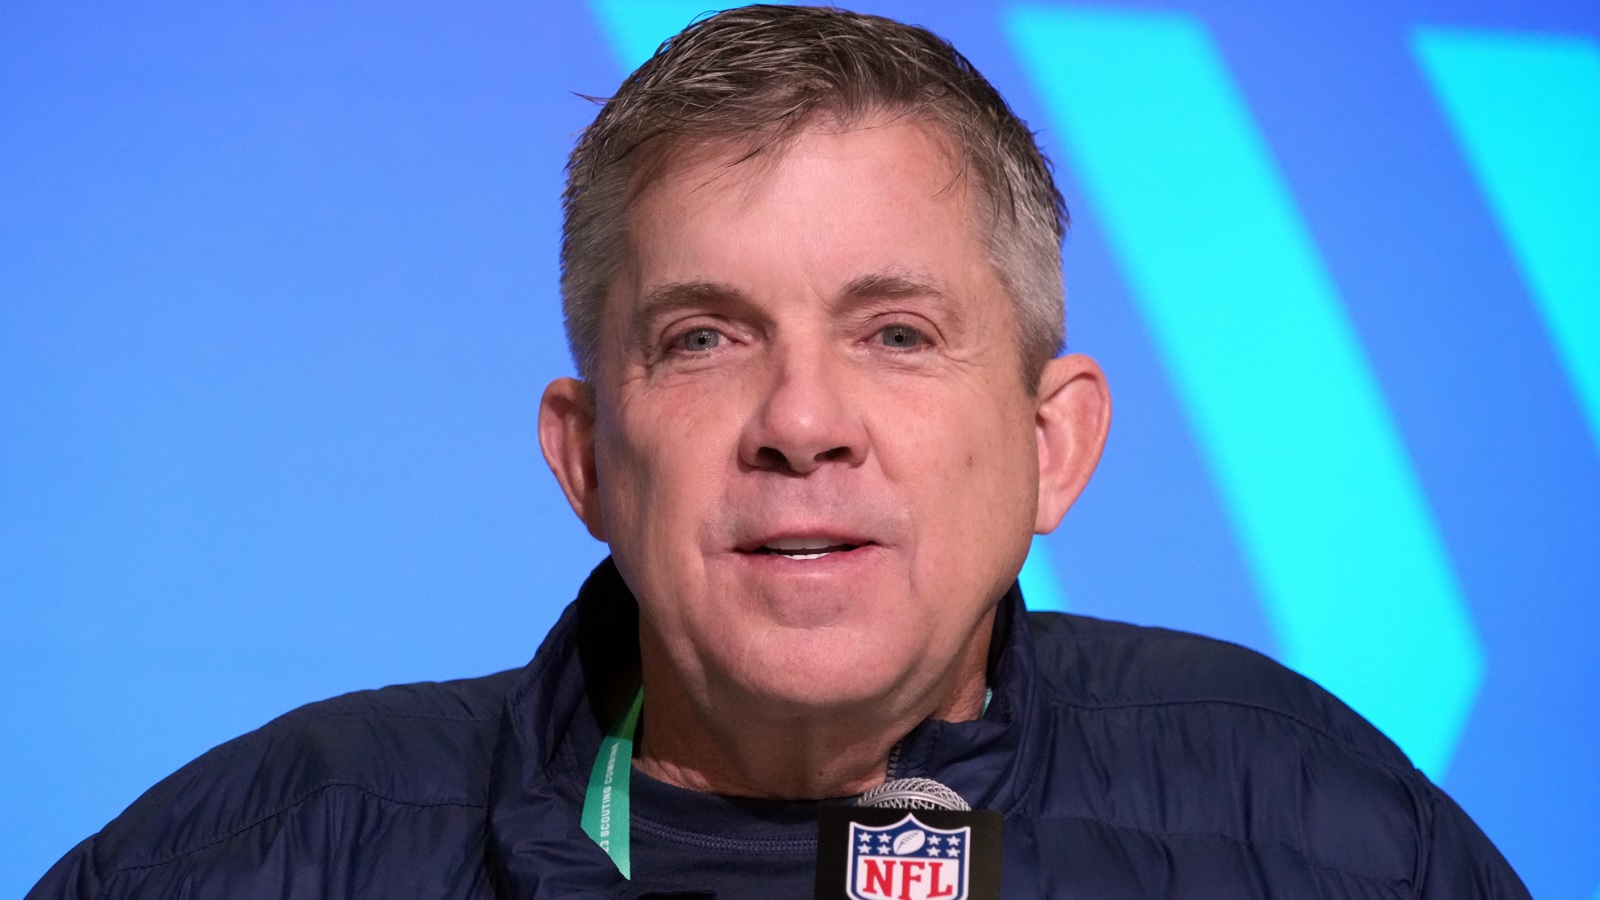 NFL News: Sean Payton Reveals How He Made A Perfect Fool Of Minnesota Vikings, Classic NFL Draft Day Deception